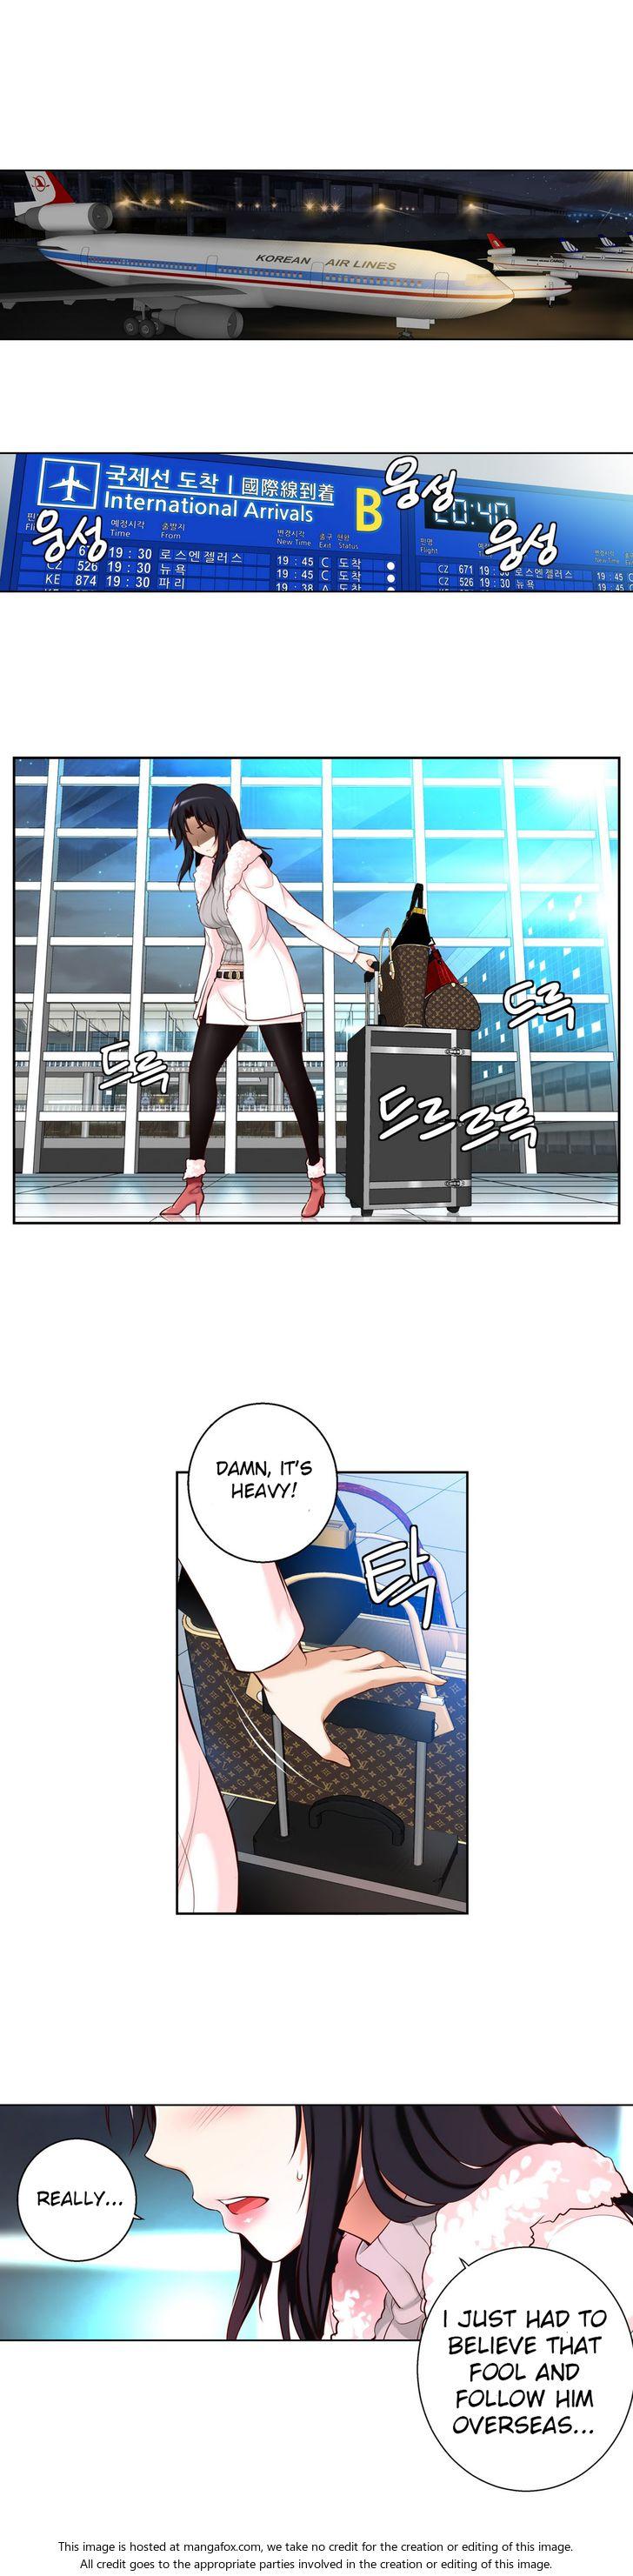 [Donggul Gom] She is Young (English) Part 1/2 446